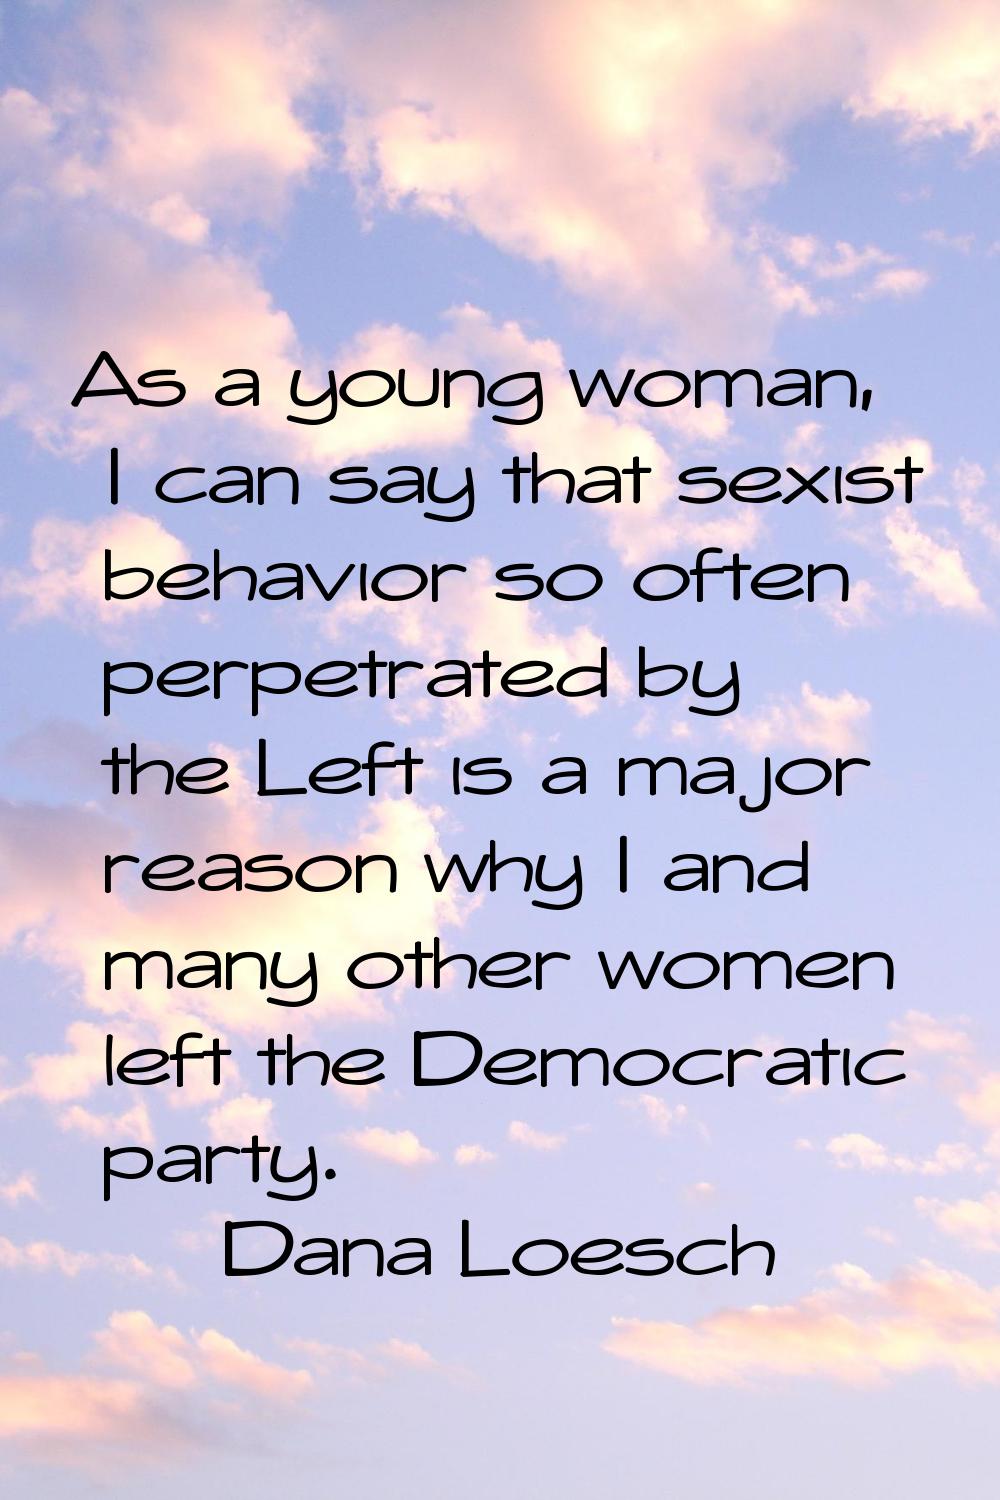 As a young woman, I can say that sexist behavior so often perpetrated by the Left is a major reason